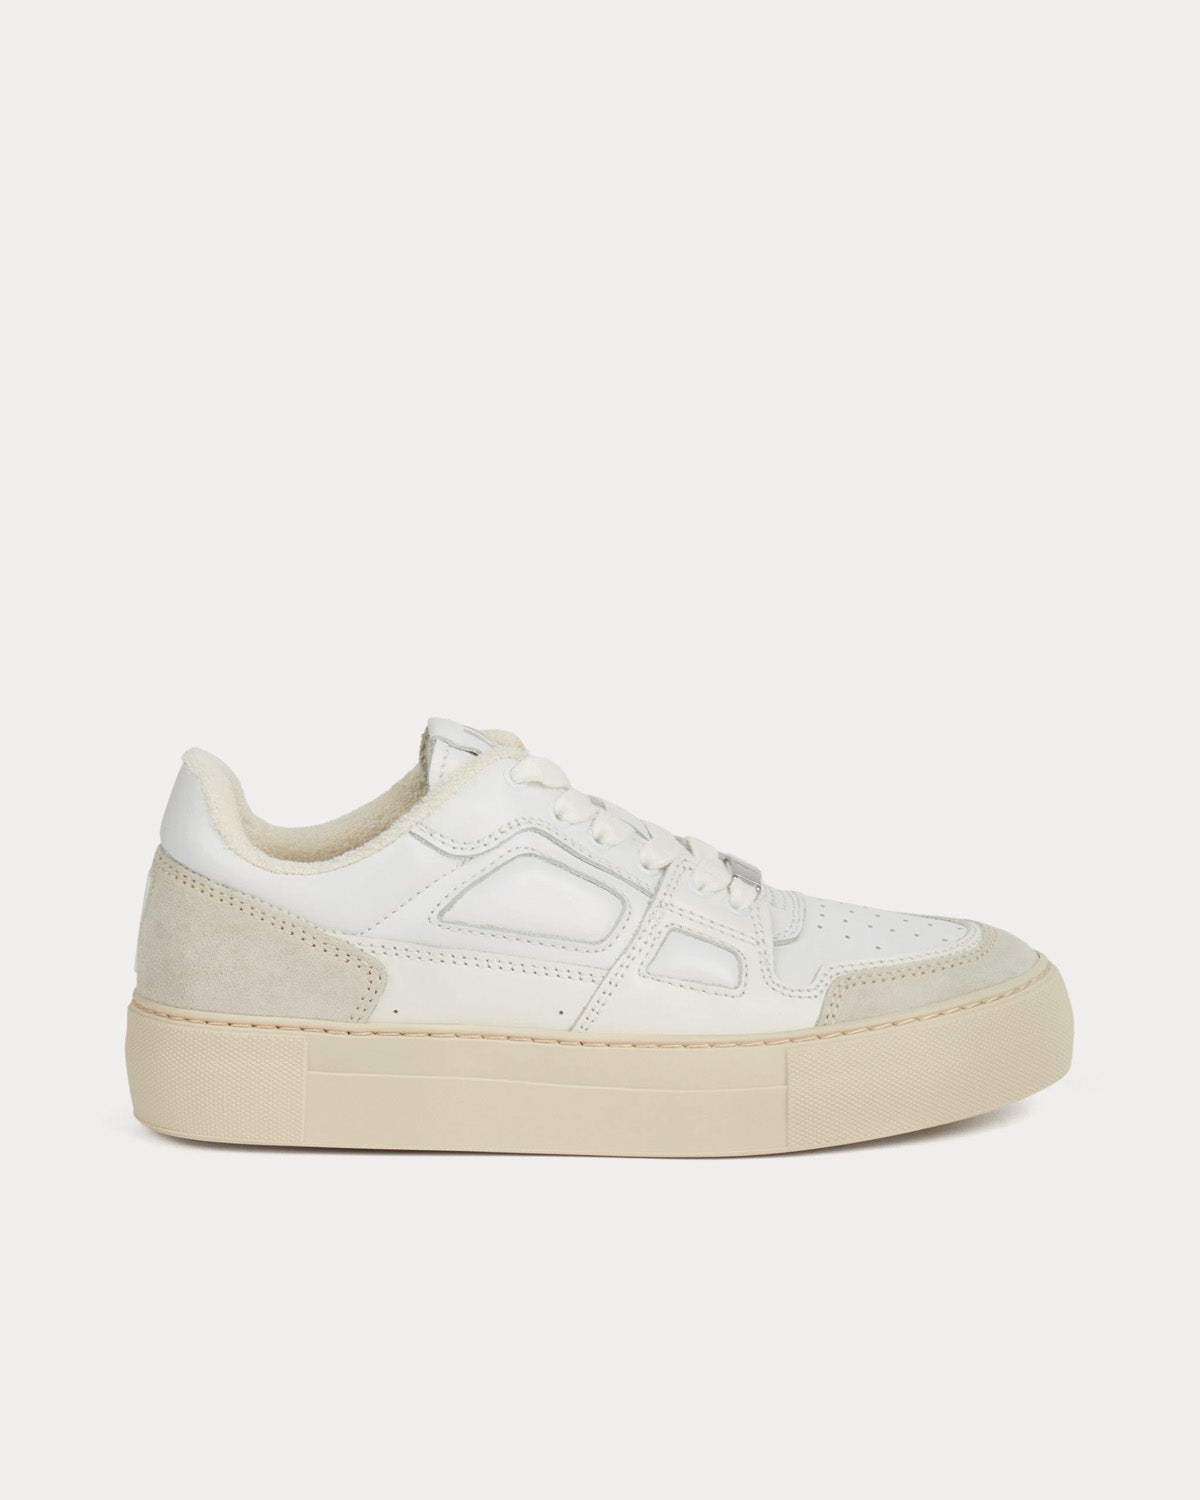 AMI - Arcade White Low Top Sneakers